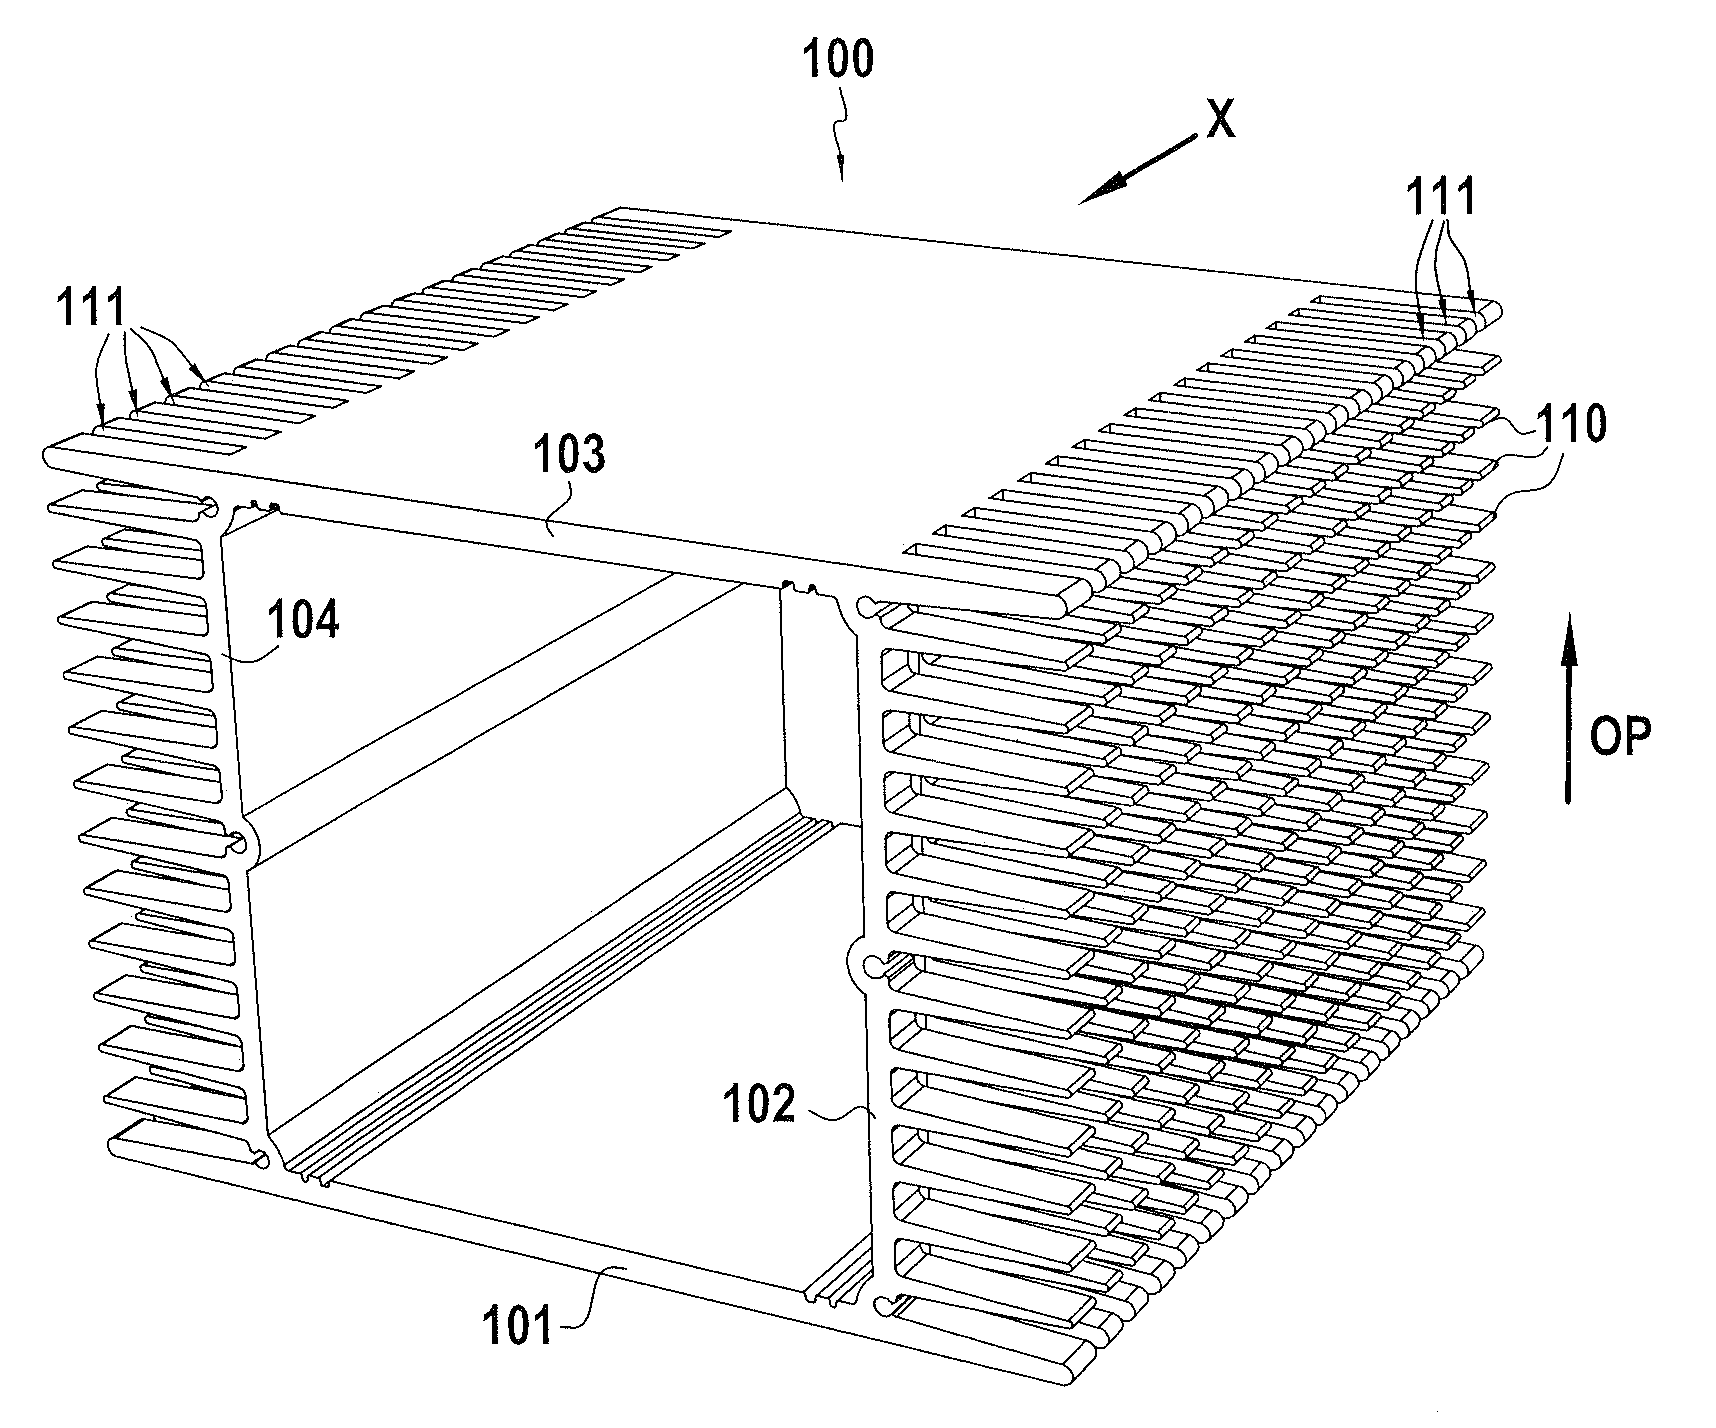 Multi-position housing made of metal extruded section member for manufacturing a waterproof power electronic device